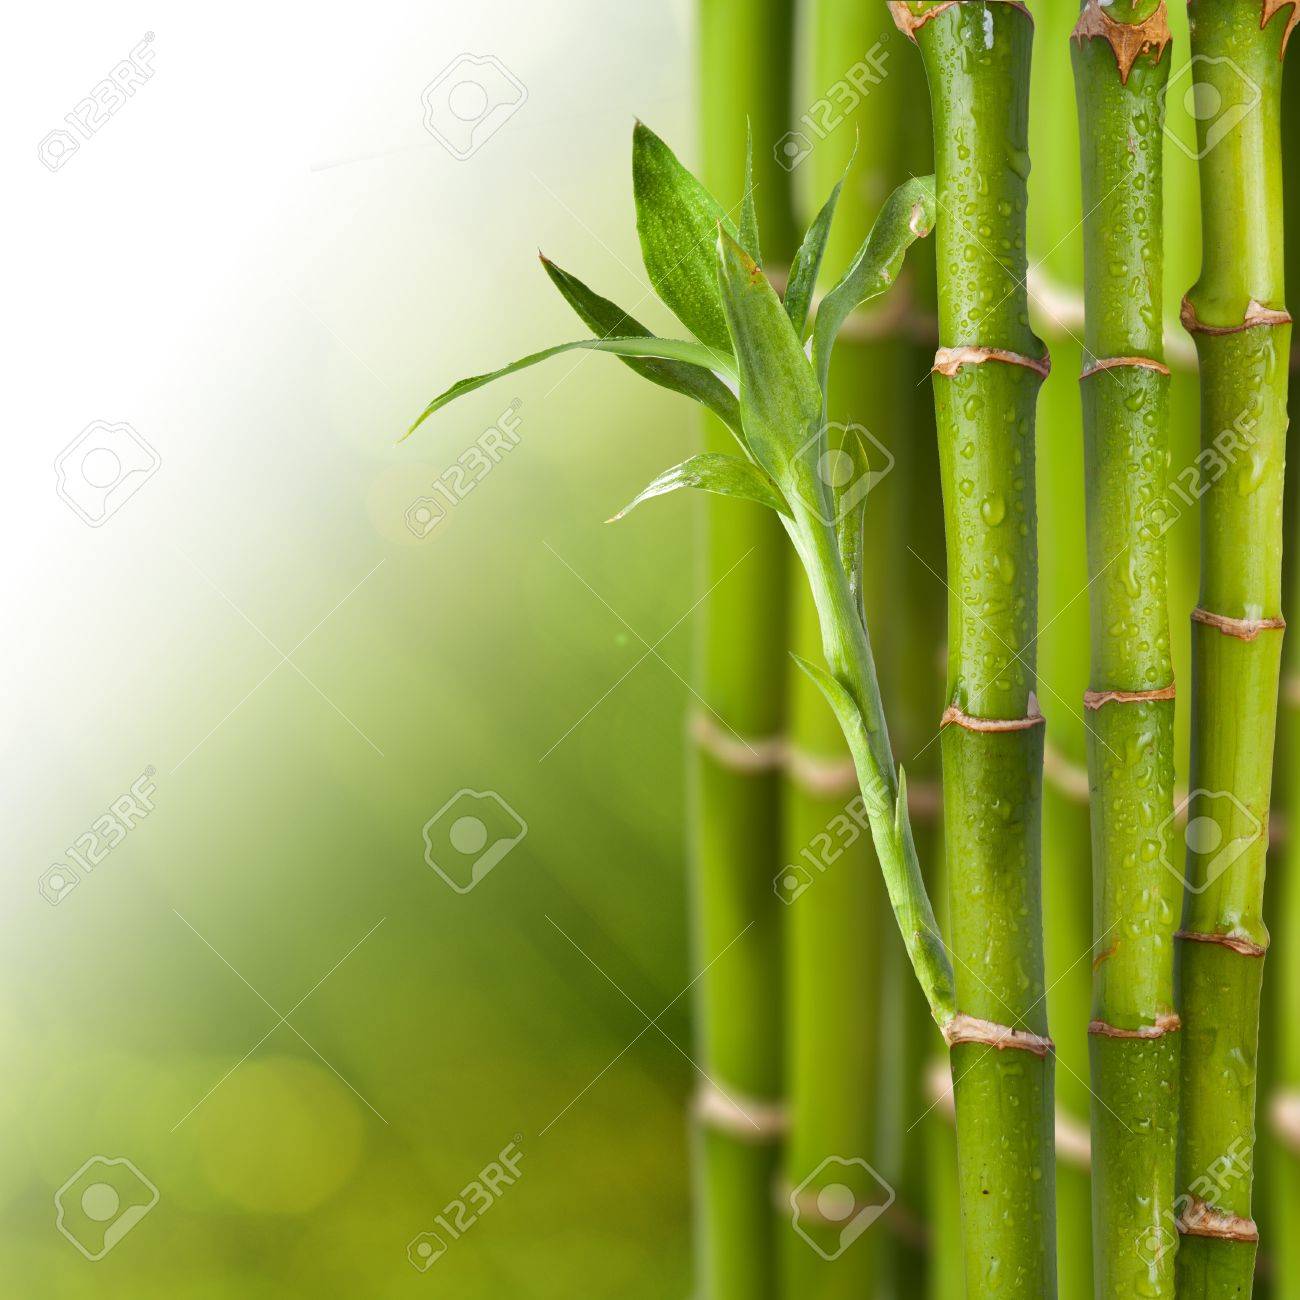 Bamboo On Green And Yellow Background Concept For Relaxation Stock